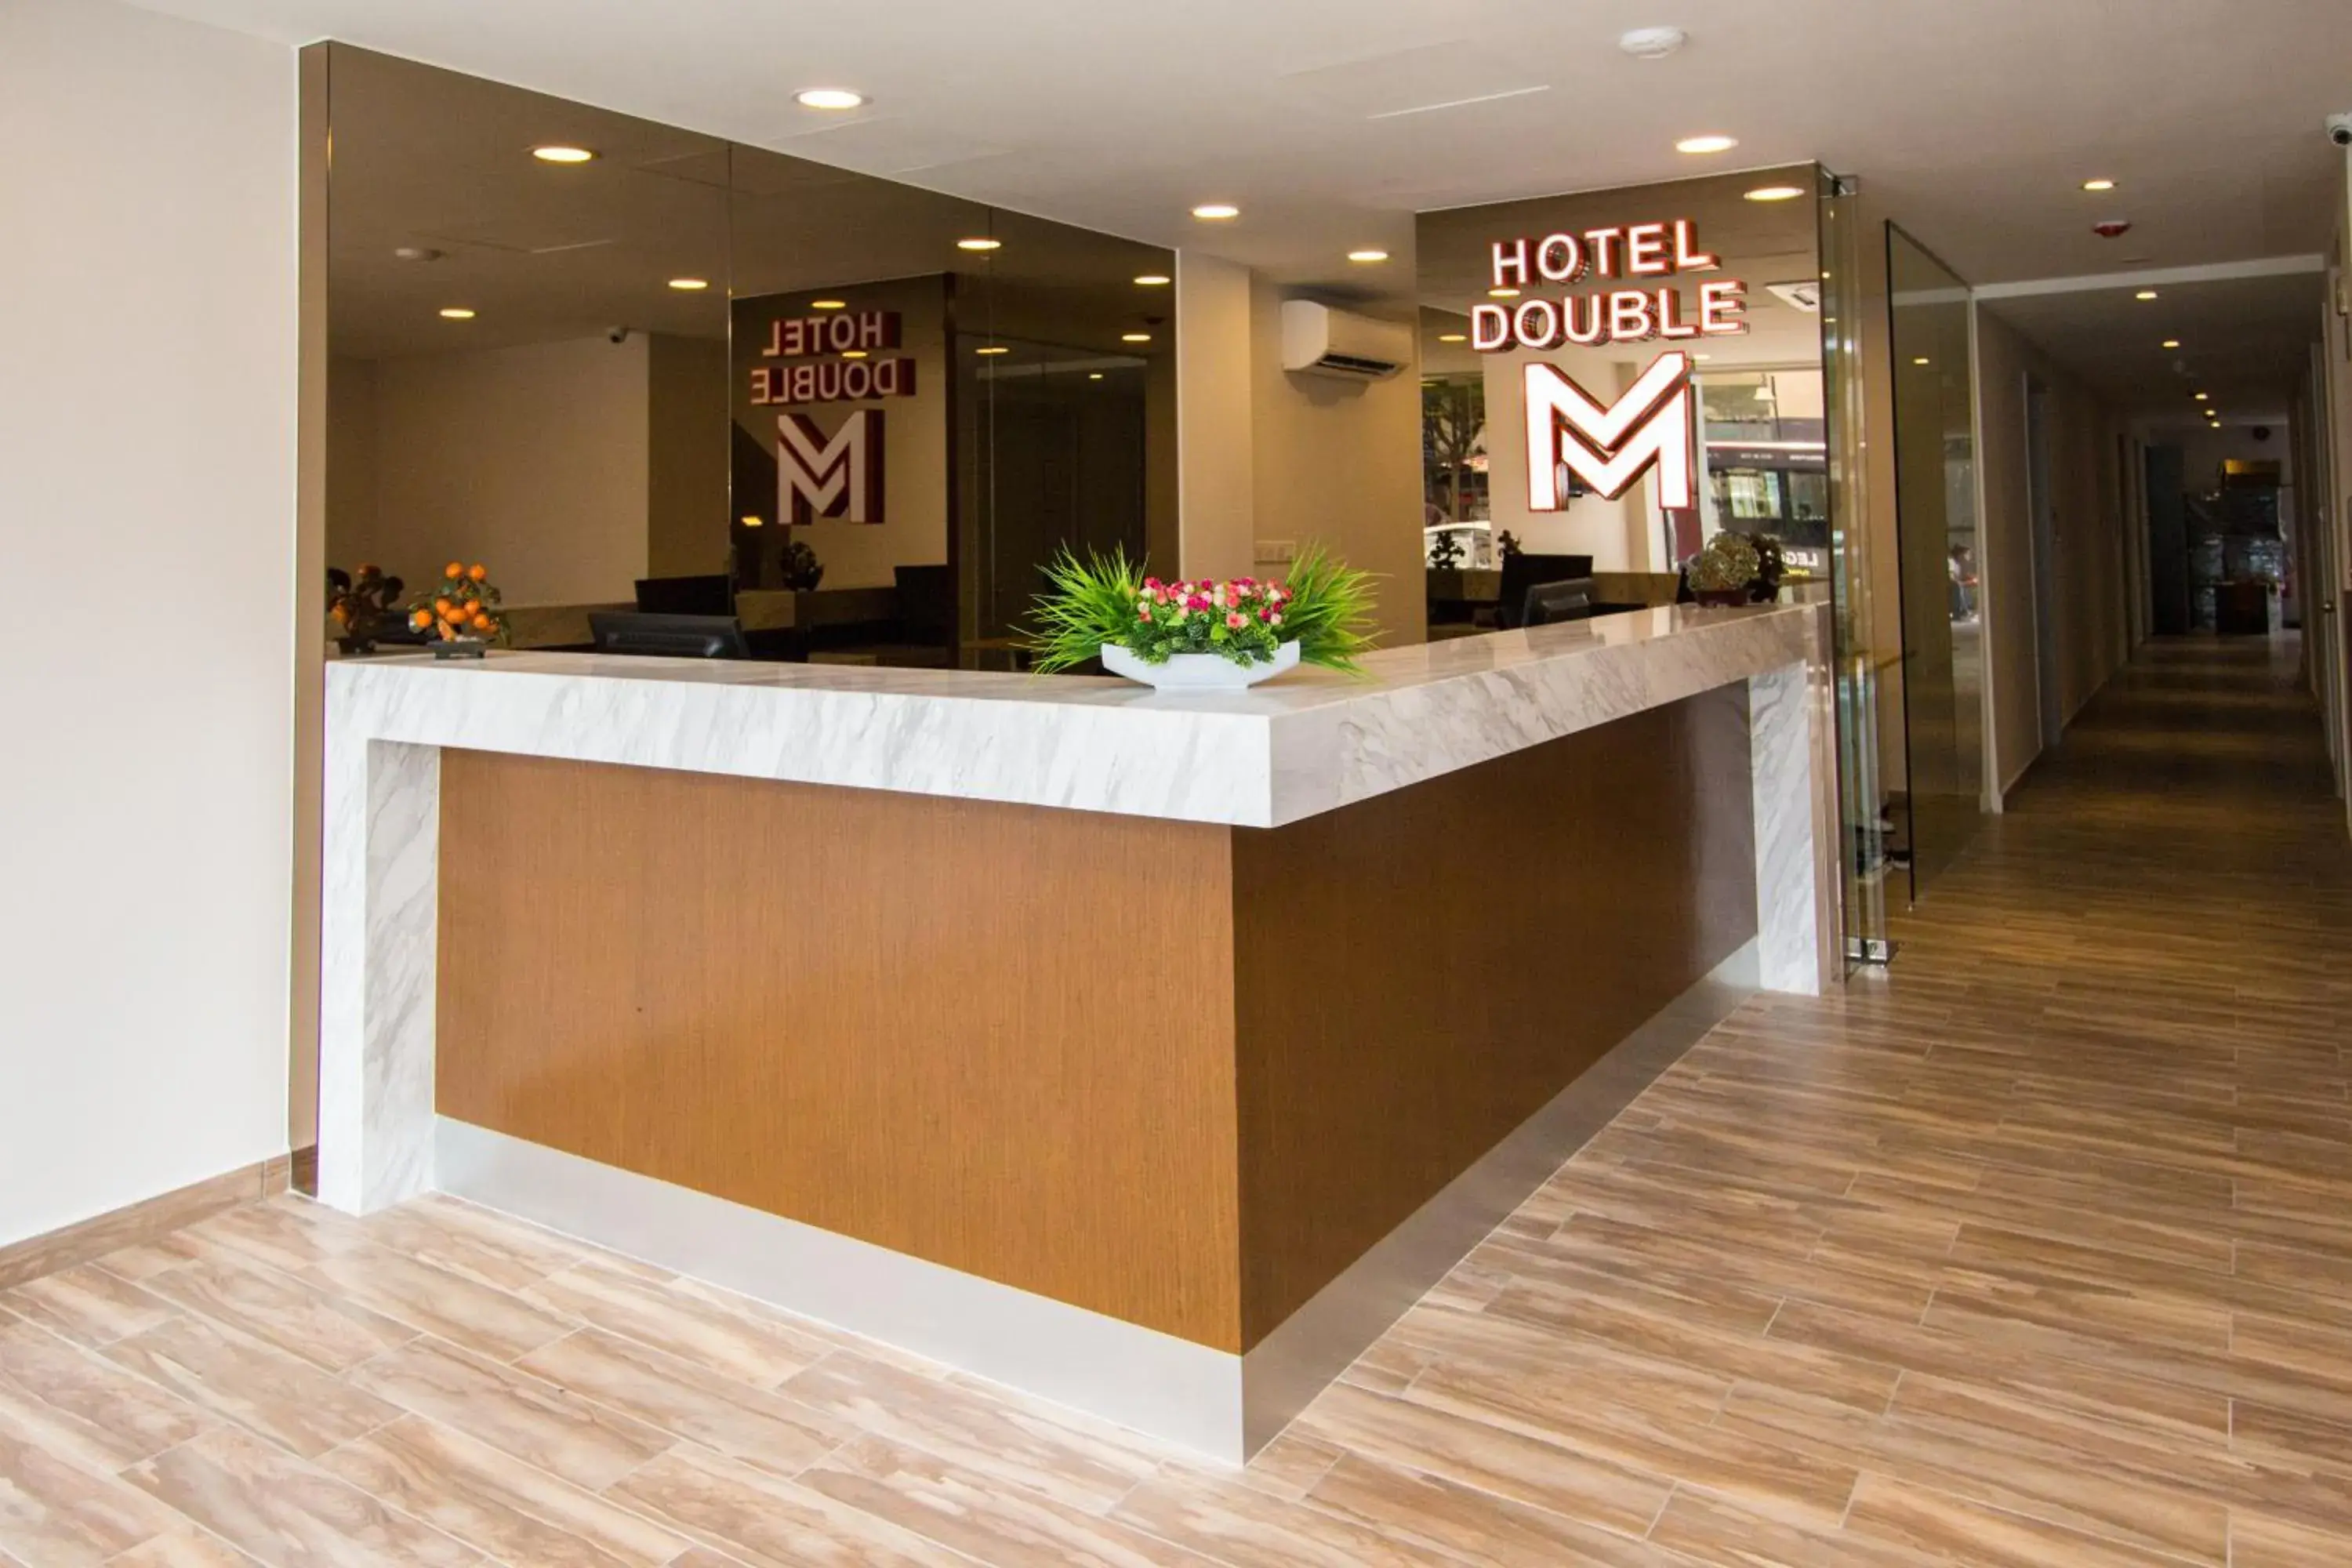 Lobby or reception in Double M Hotel @ Kl Sentral